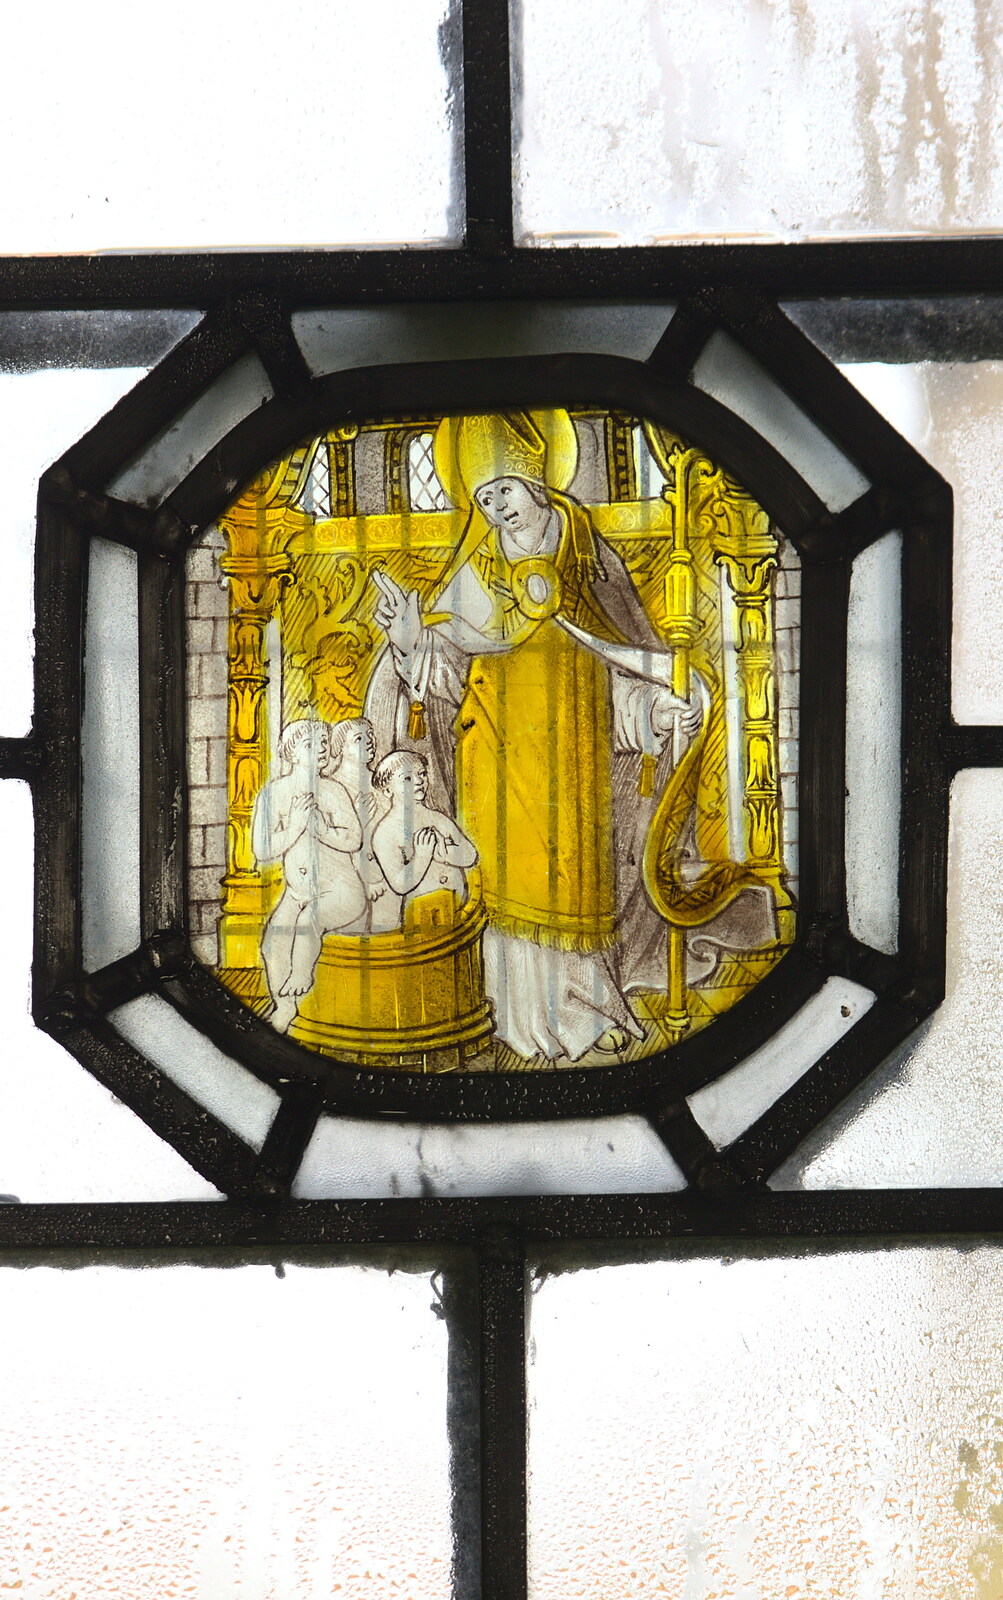 Mediaeval stained glass from A Trip to Ickworth House, Horringer, Suffolk - 30th December 2016